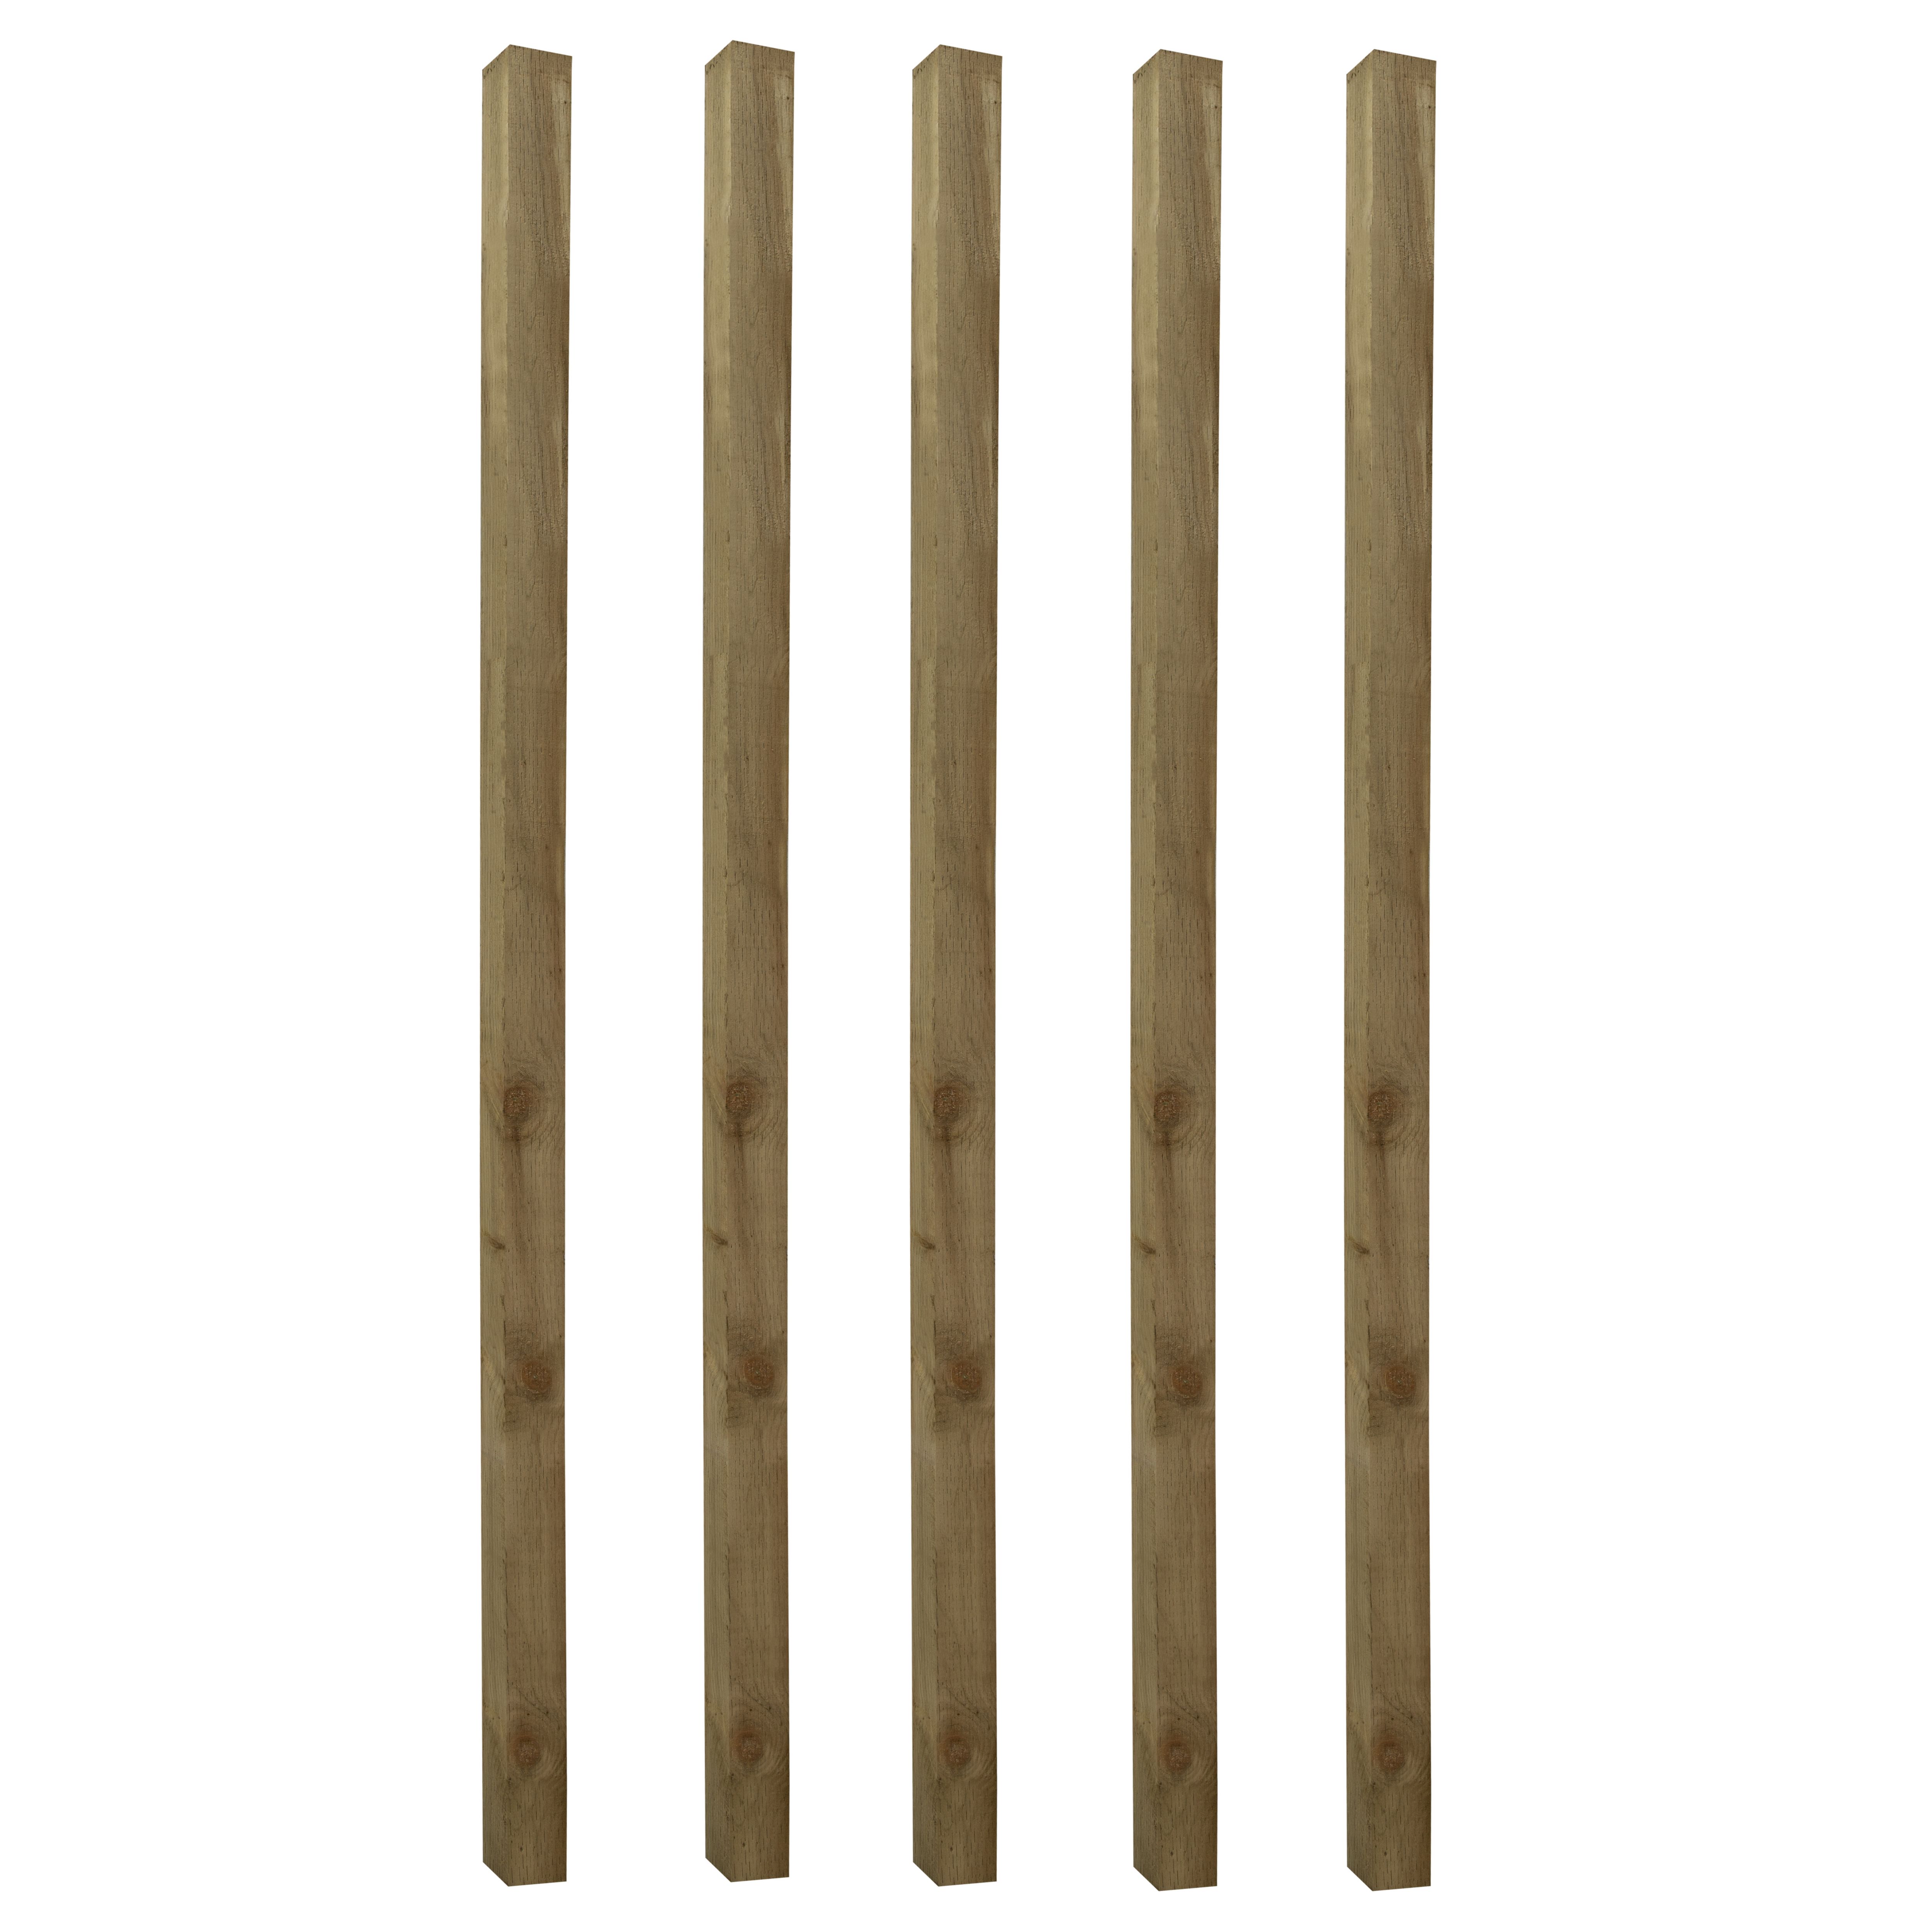 UC4 Green Square Wooden Fence post (H)2.4m (W)75mm, Pack of 5